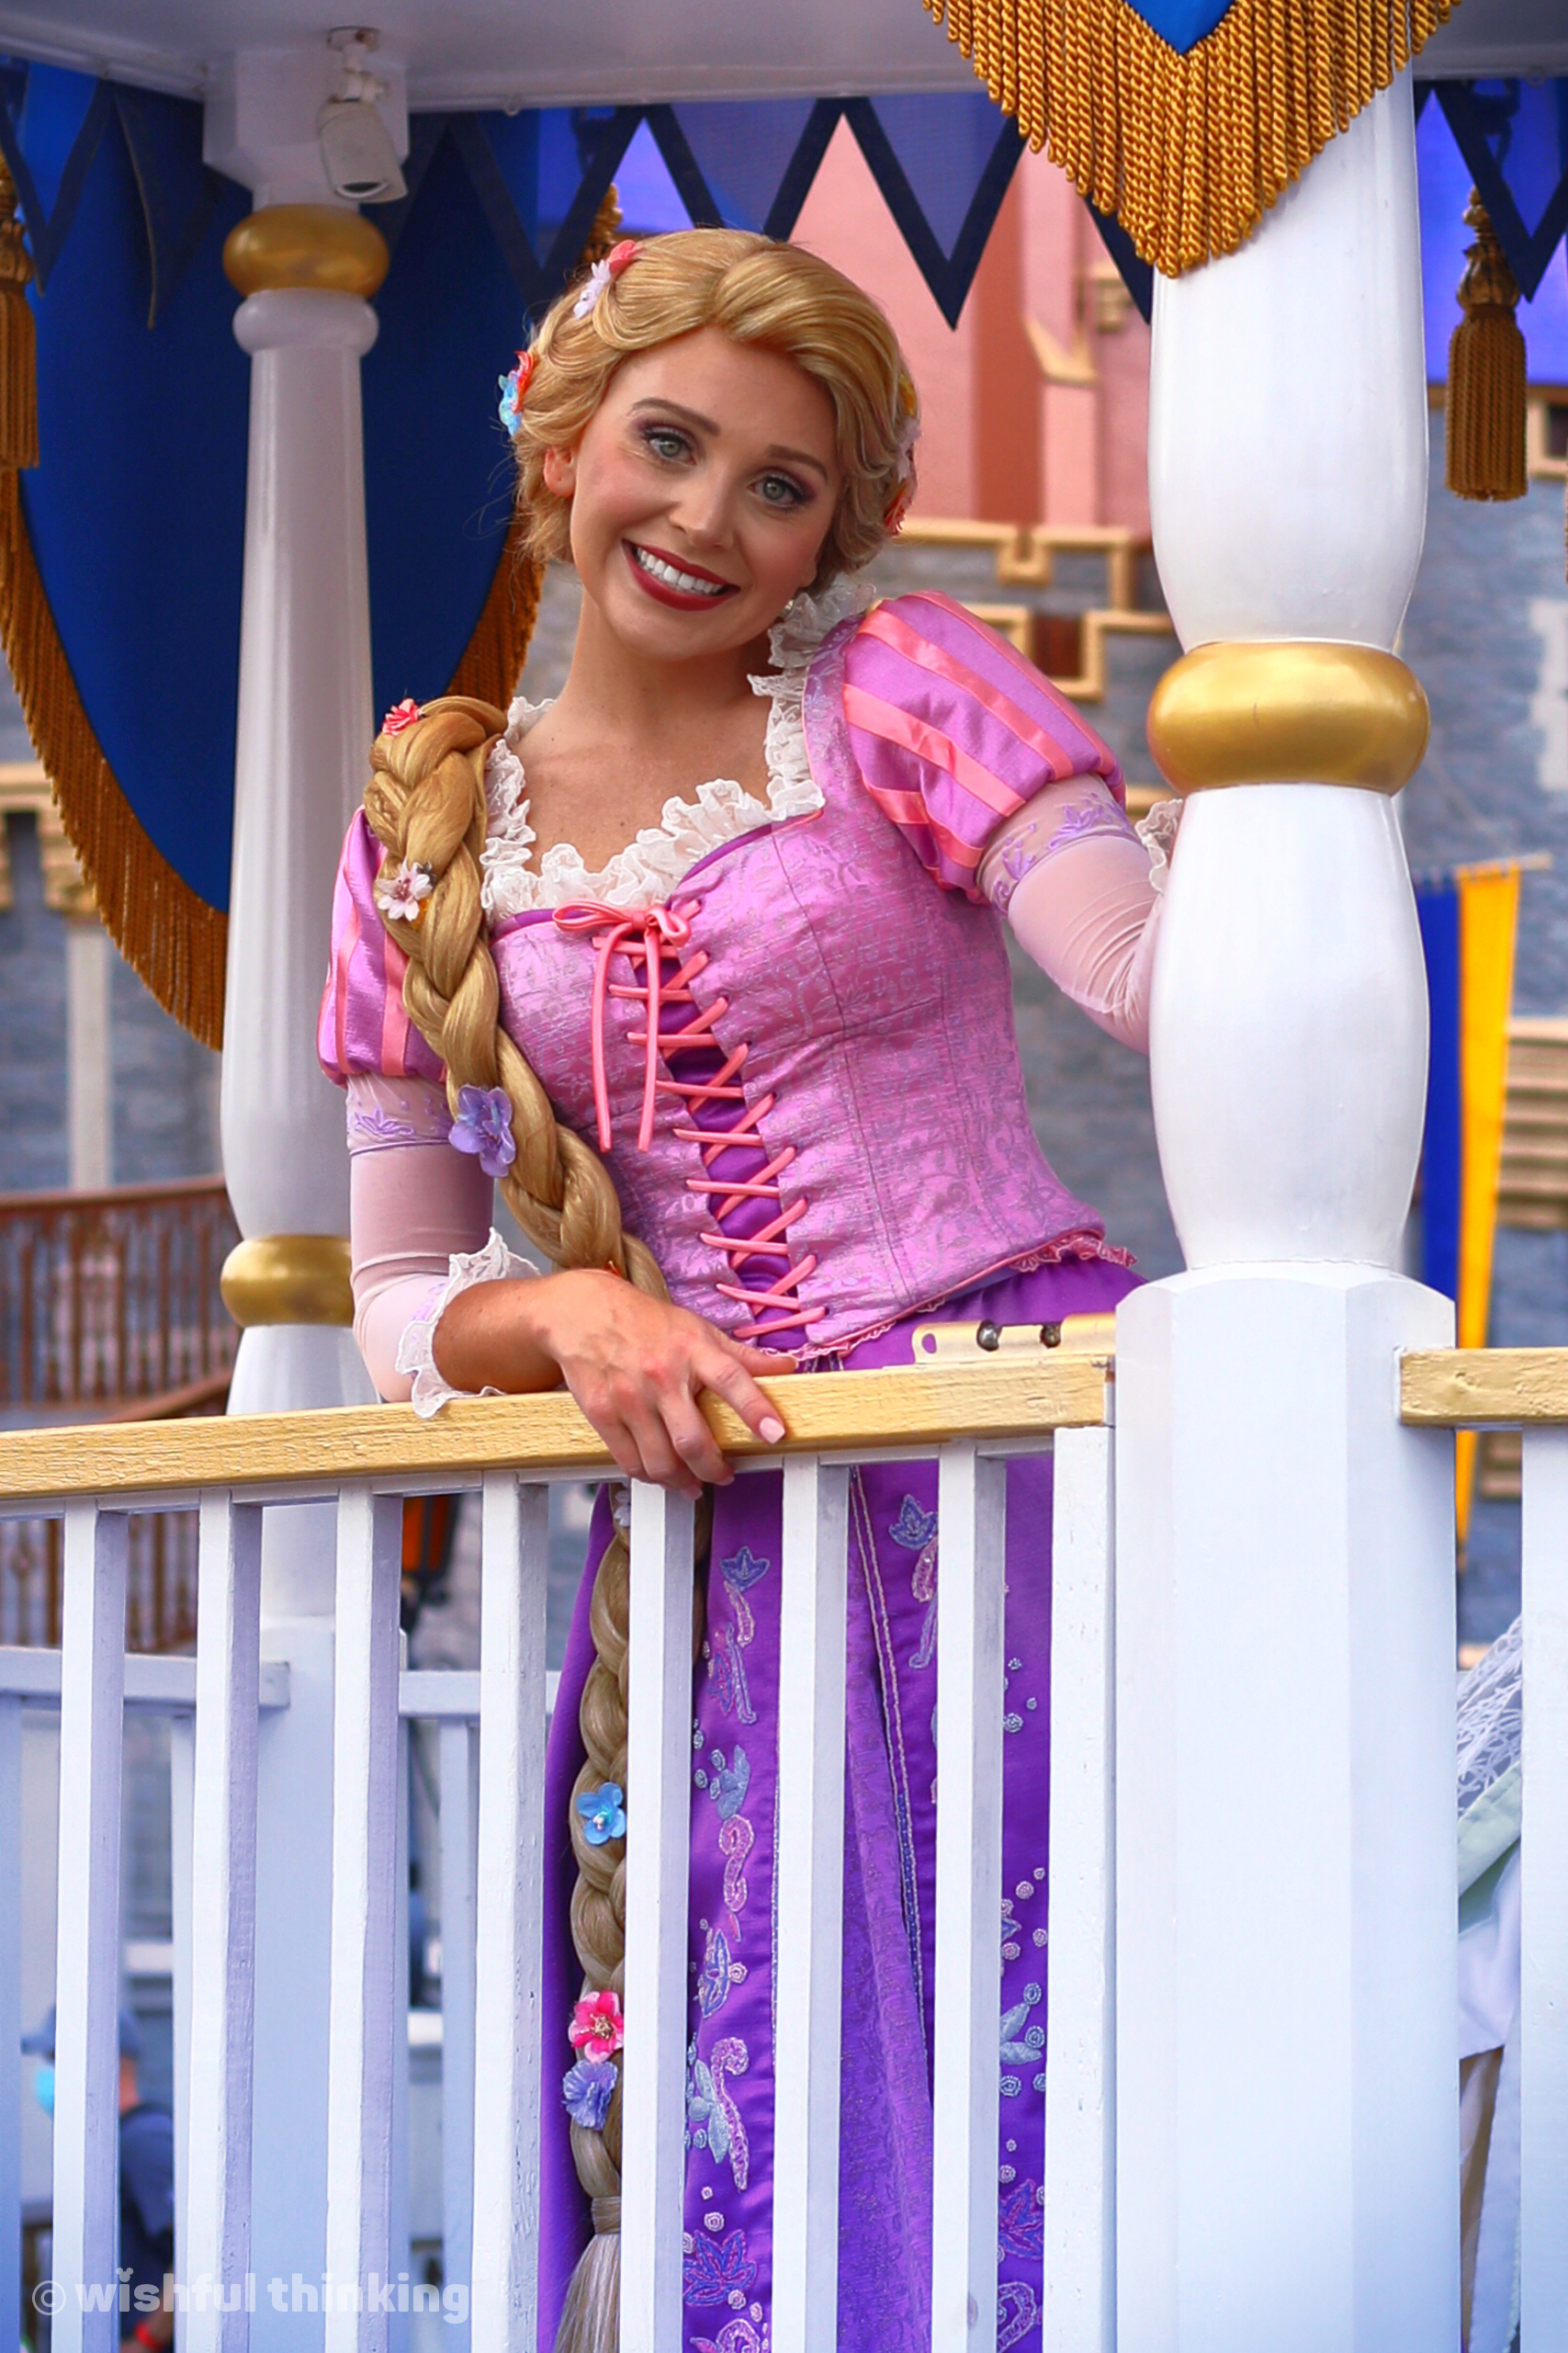 Rapunzel smiles from a passing character cavalcade in Walt Disney World's Magic Kingdom